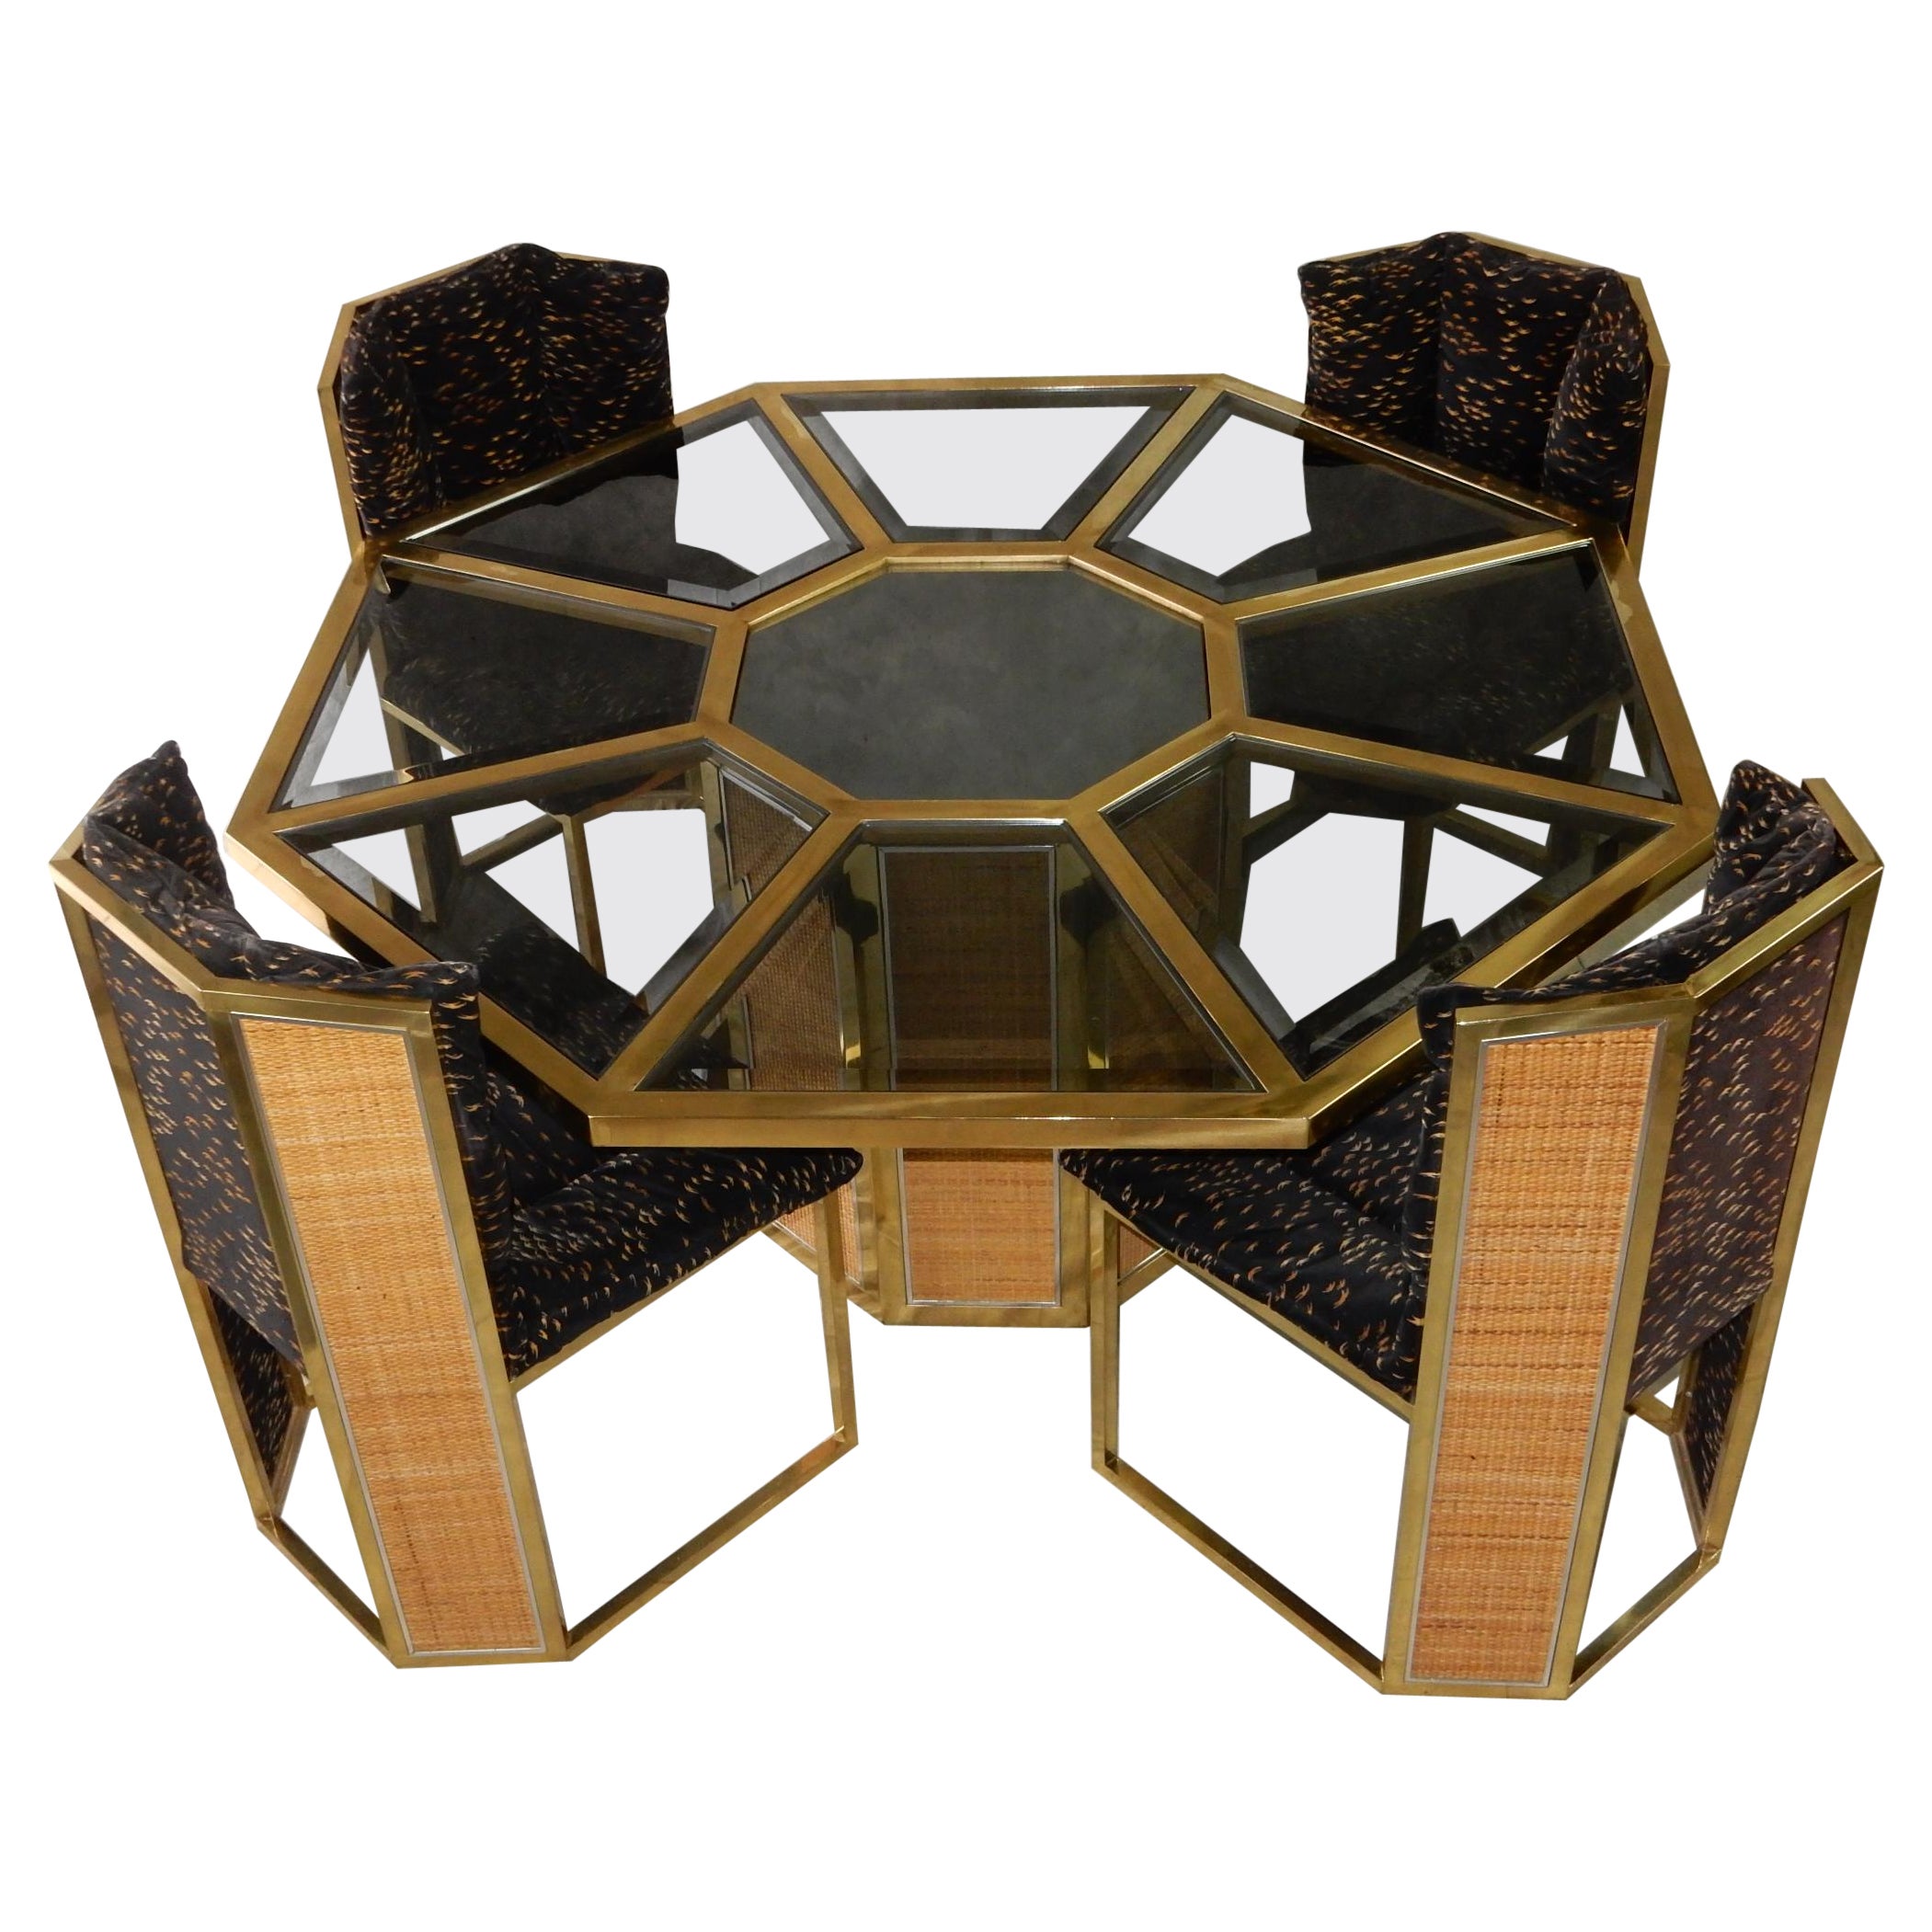 Romeo Rega design for Mario Sabot Italy Brass Octagon Dining Table & 4 Chairs 